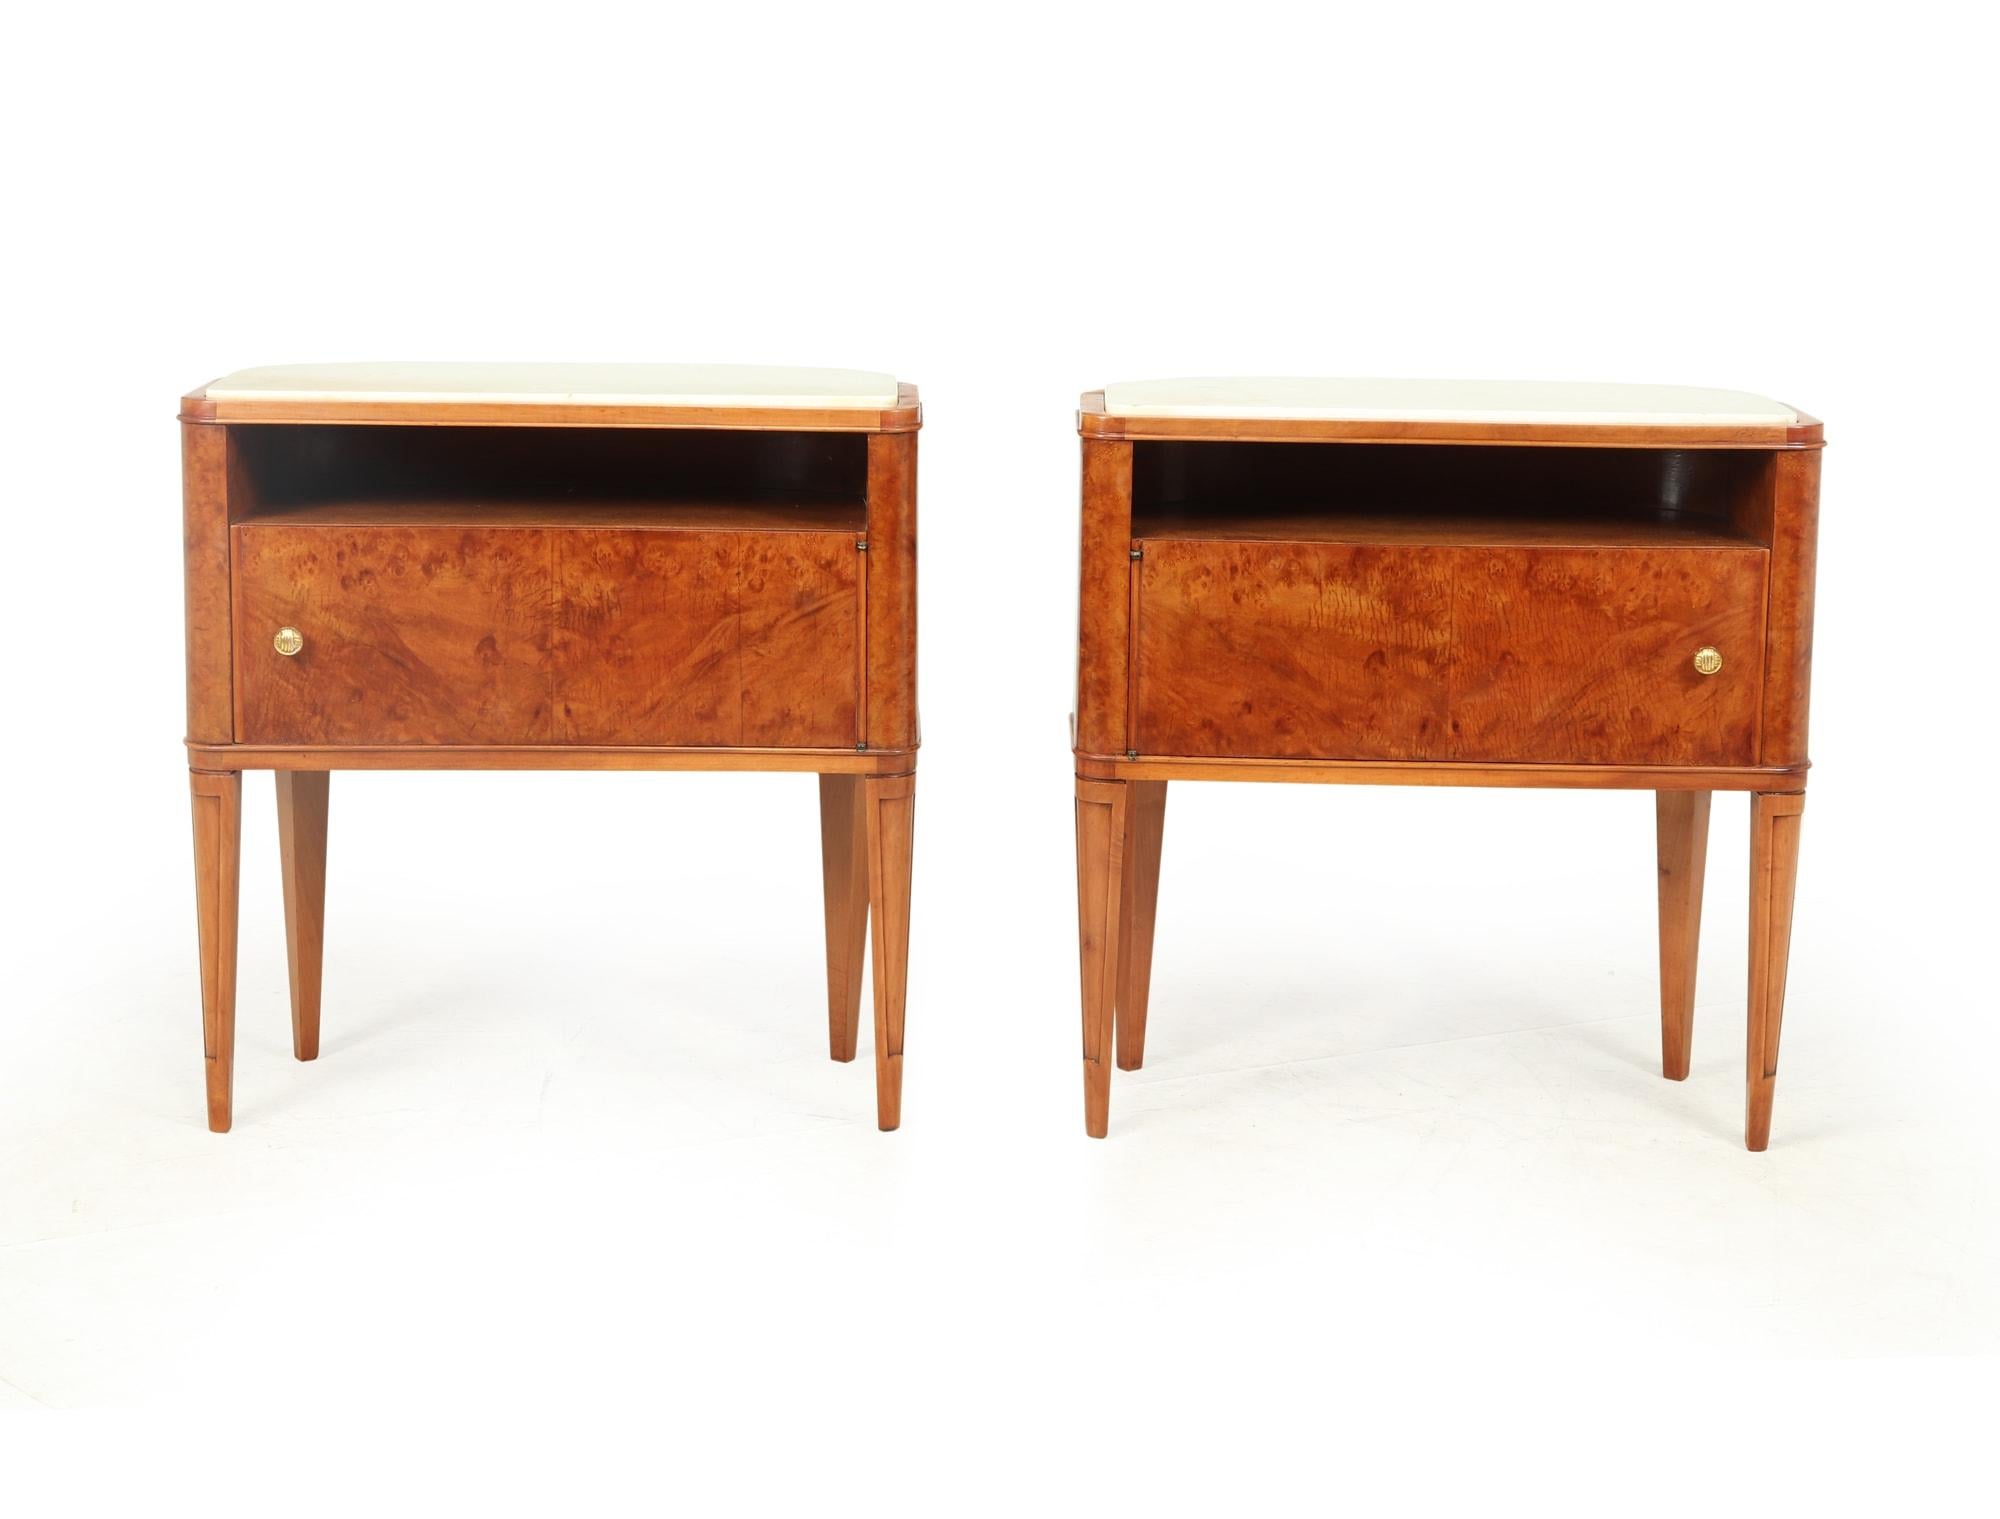 A pair of 1950’s burr walnut Italian side cabinets with white Granite tops can be used as bedside tables but as they are curved and polished all round they can be free standing in the center of a room either side of a sofa. The cabinets have been